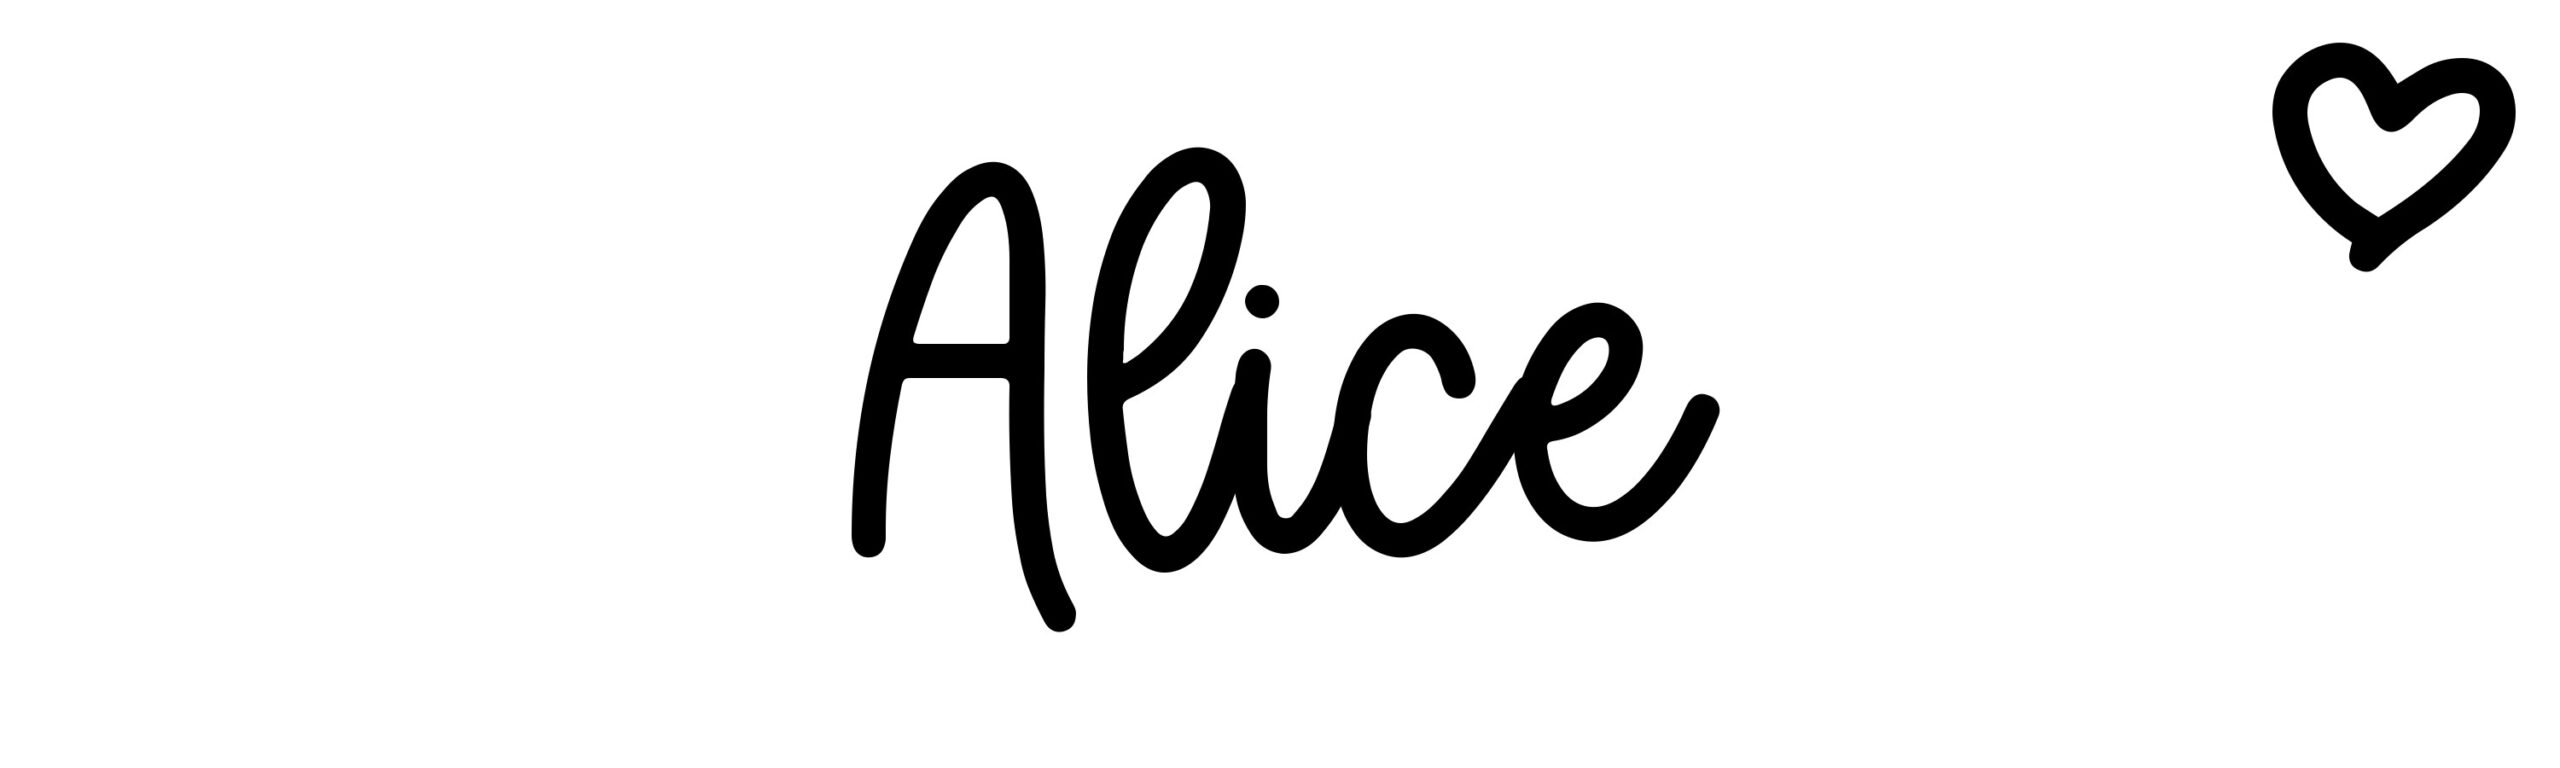 Alice - Name meaning, origin, variations and more